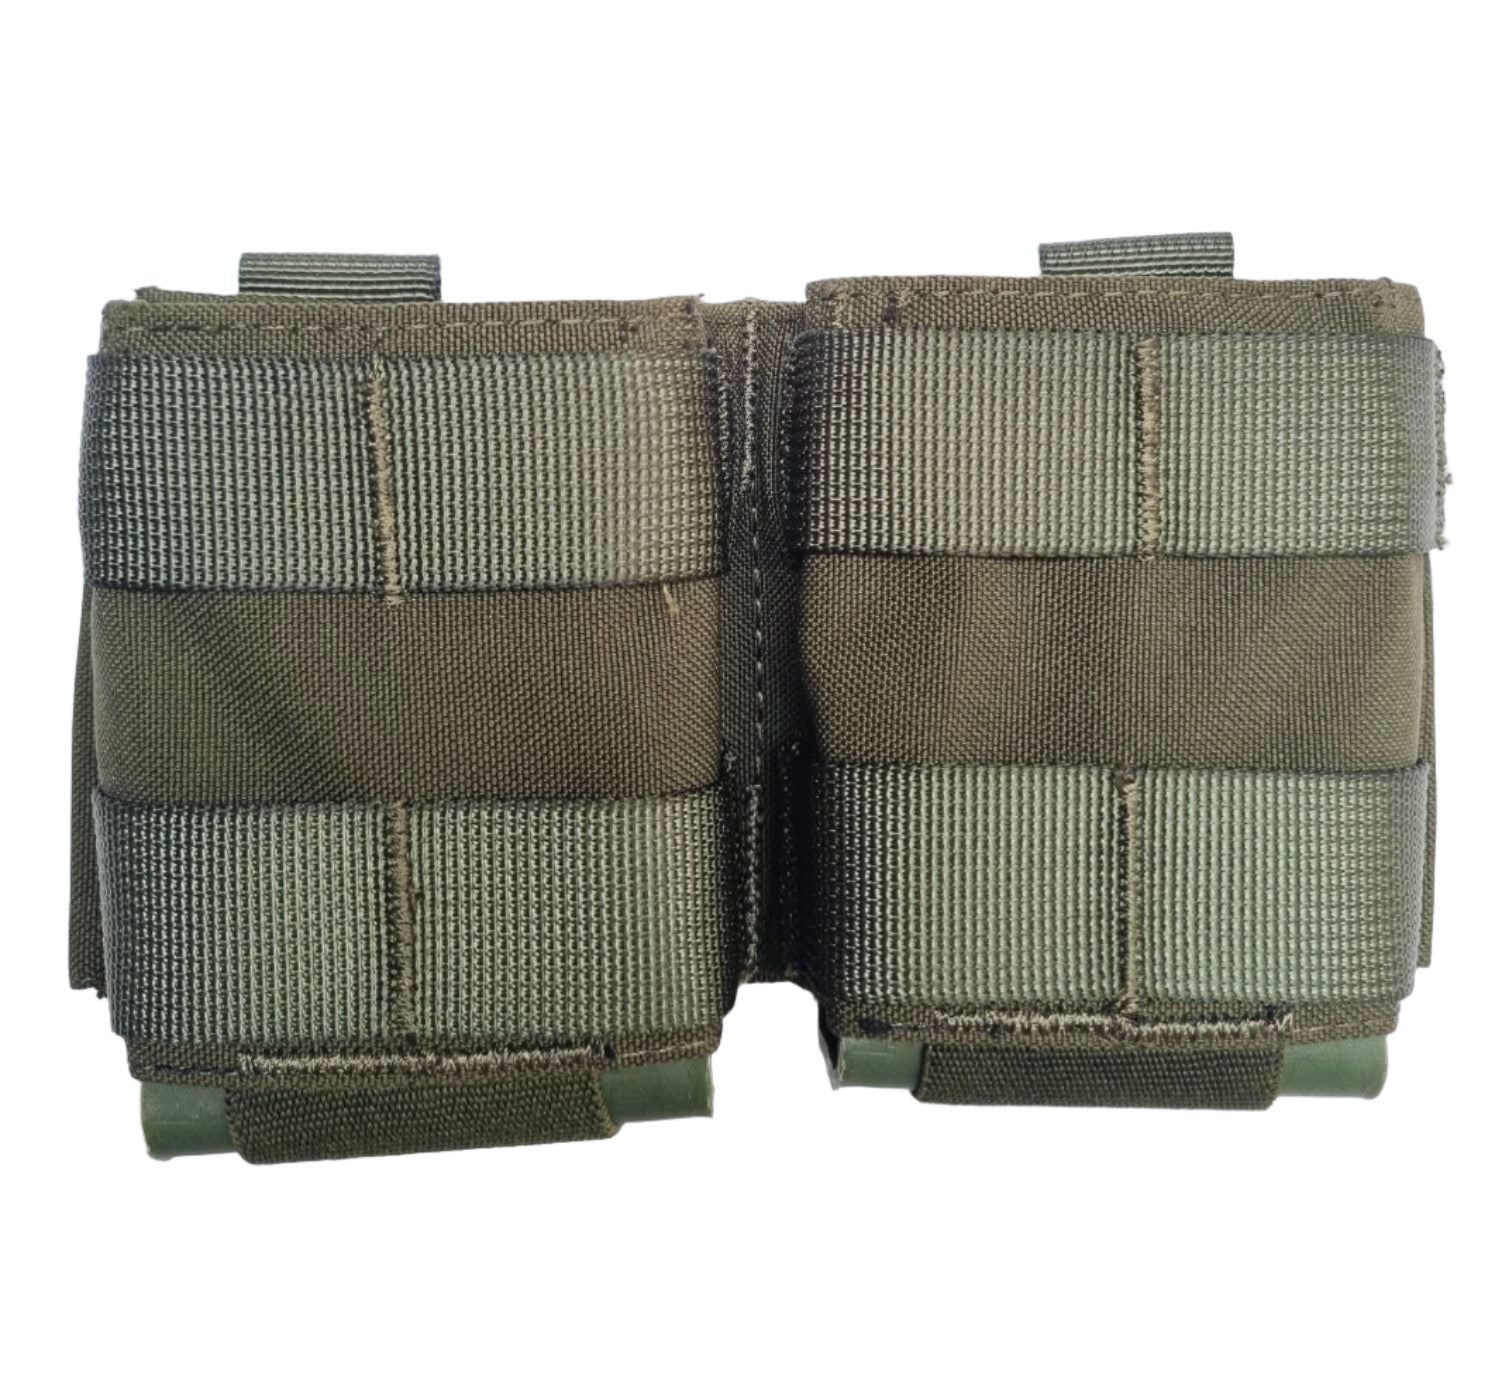 SHE-23032 GRIPTAC DOUBLE M4/M16 MAG POUCH OD GREEN